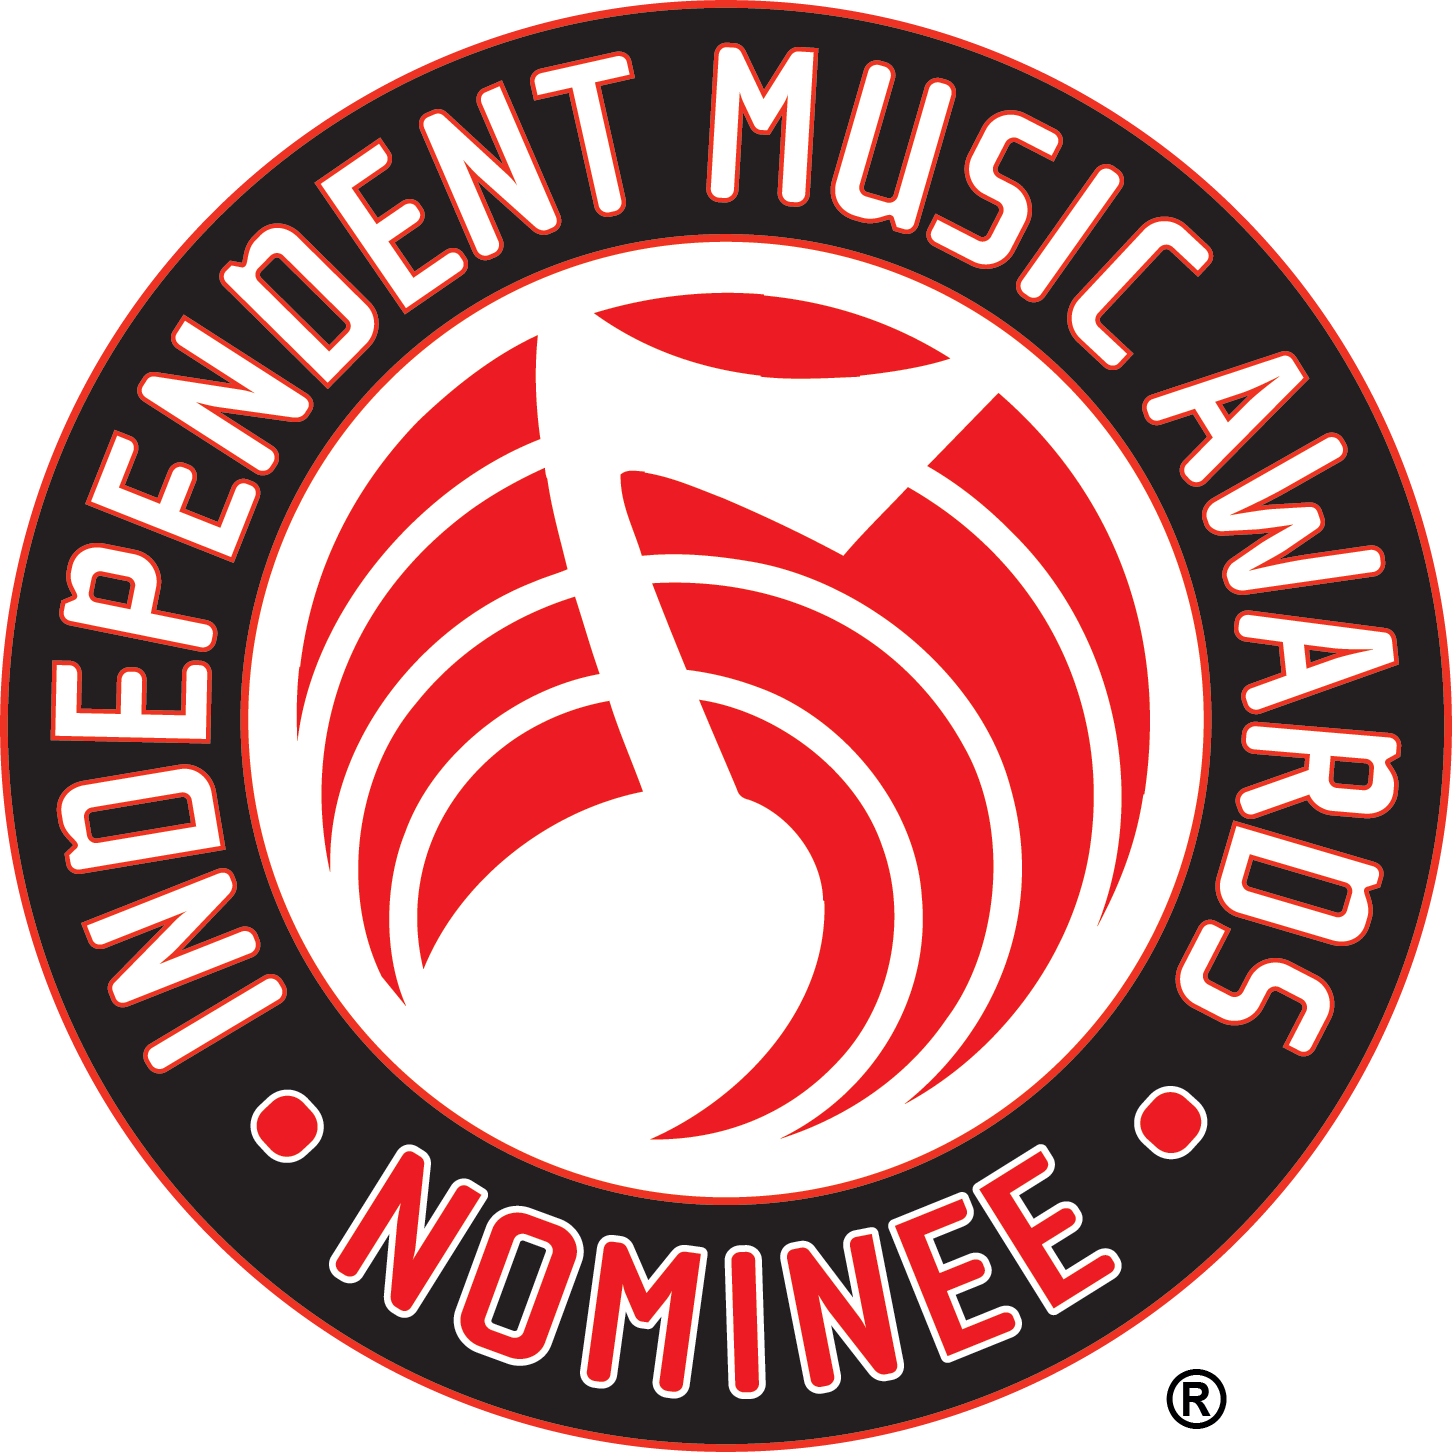 Full Article - Independent Music Awards Nominee (1452x1452)